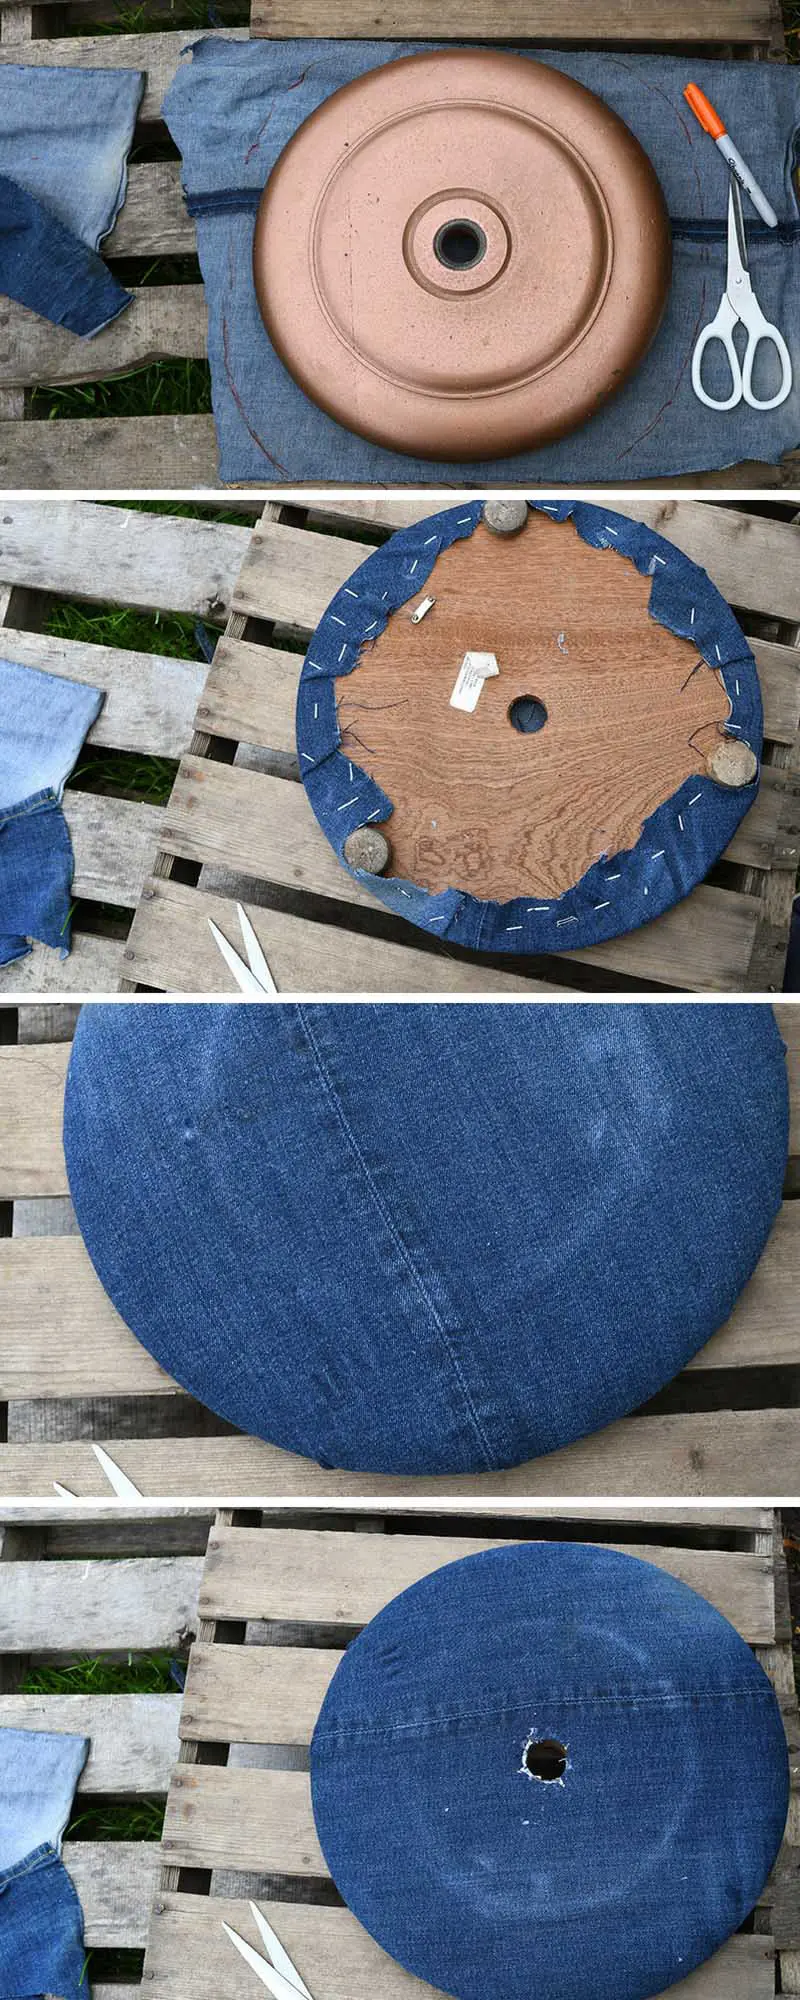 Covering the base of a floor lamp in denim